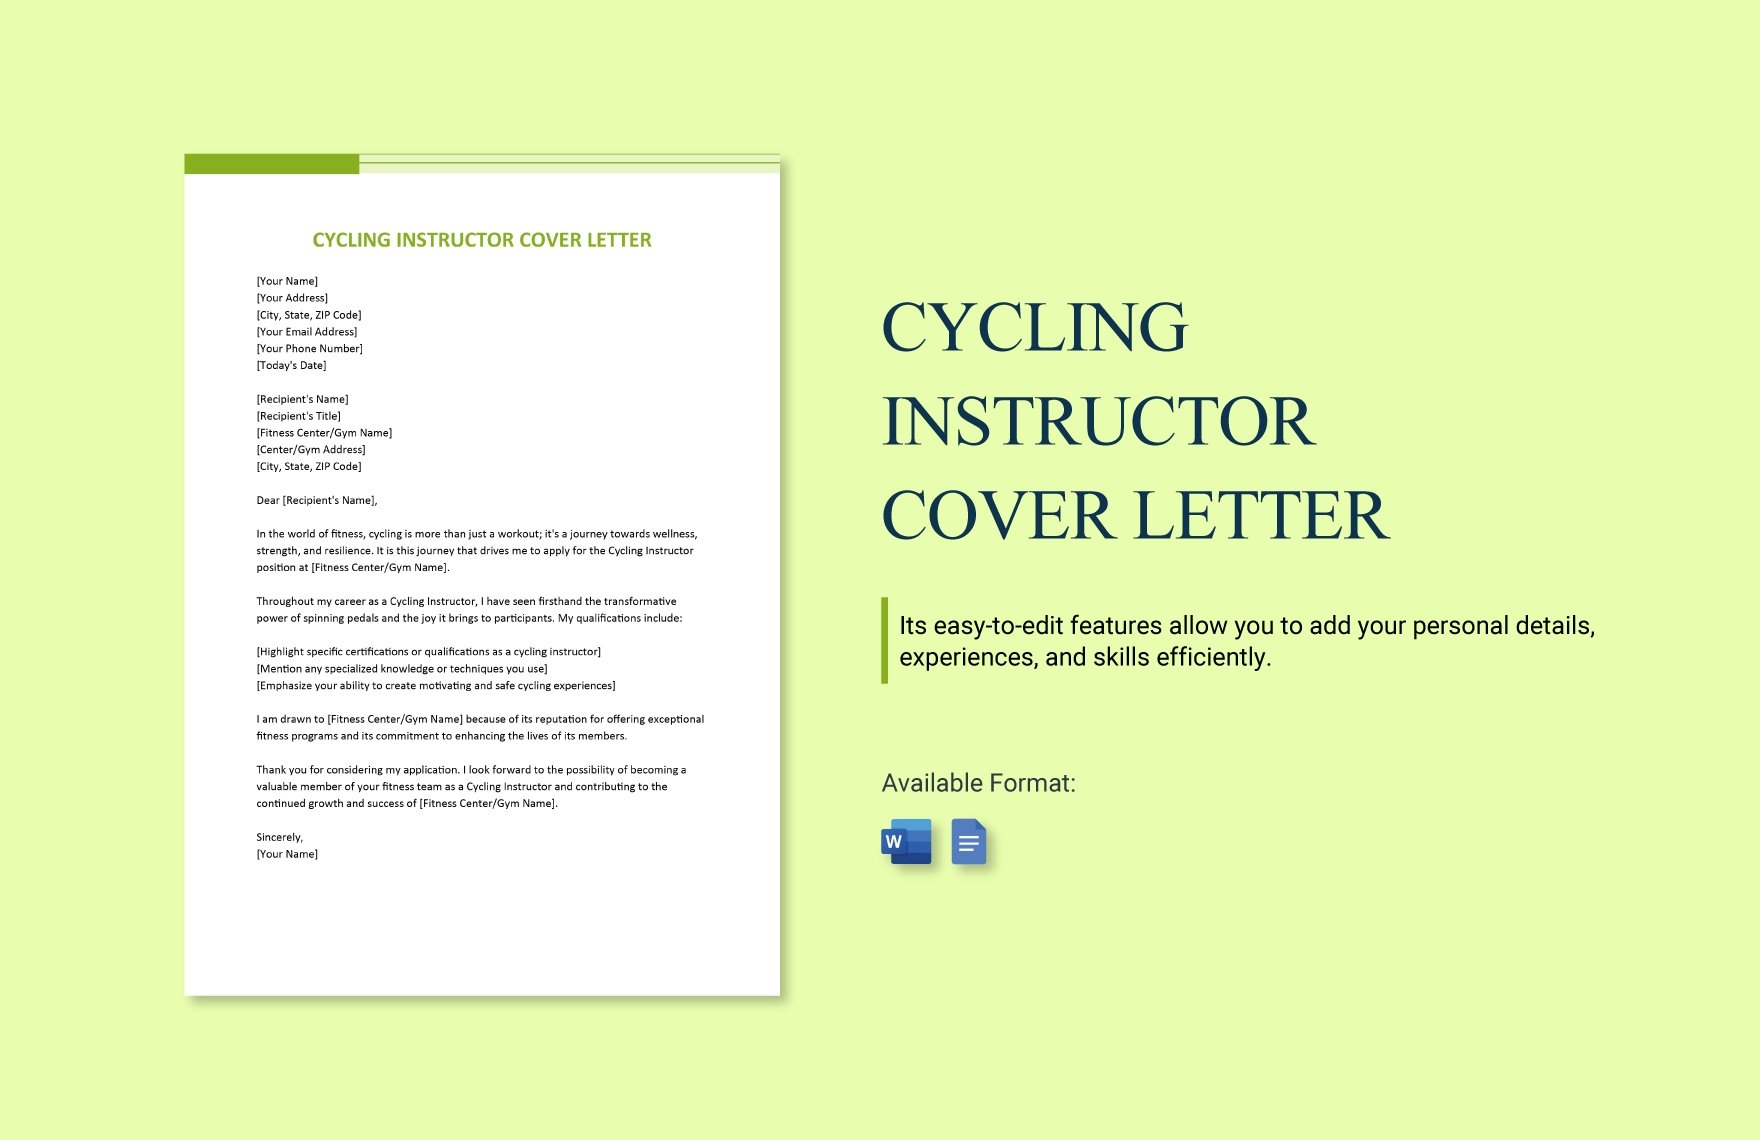 Cycling Instructor Cover Letter